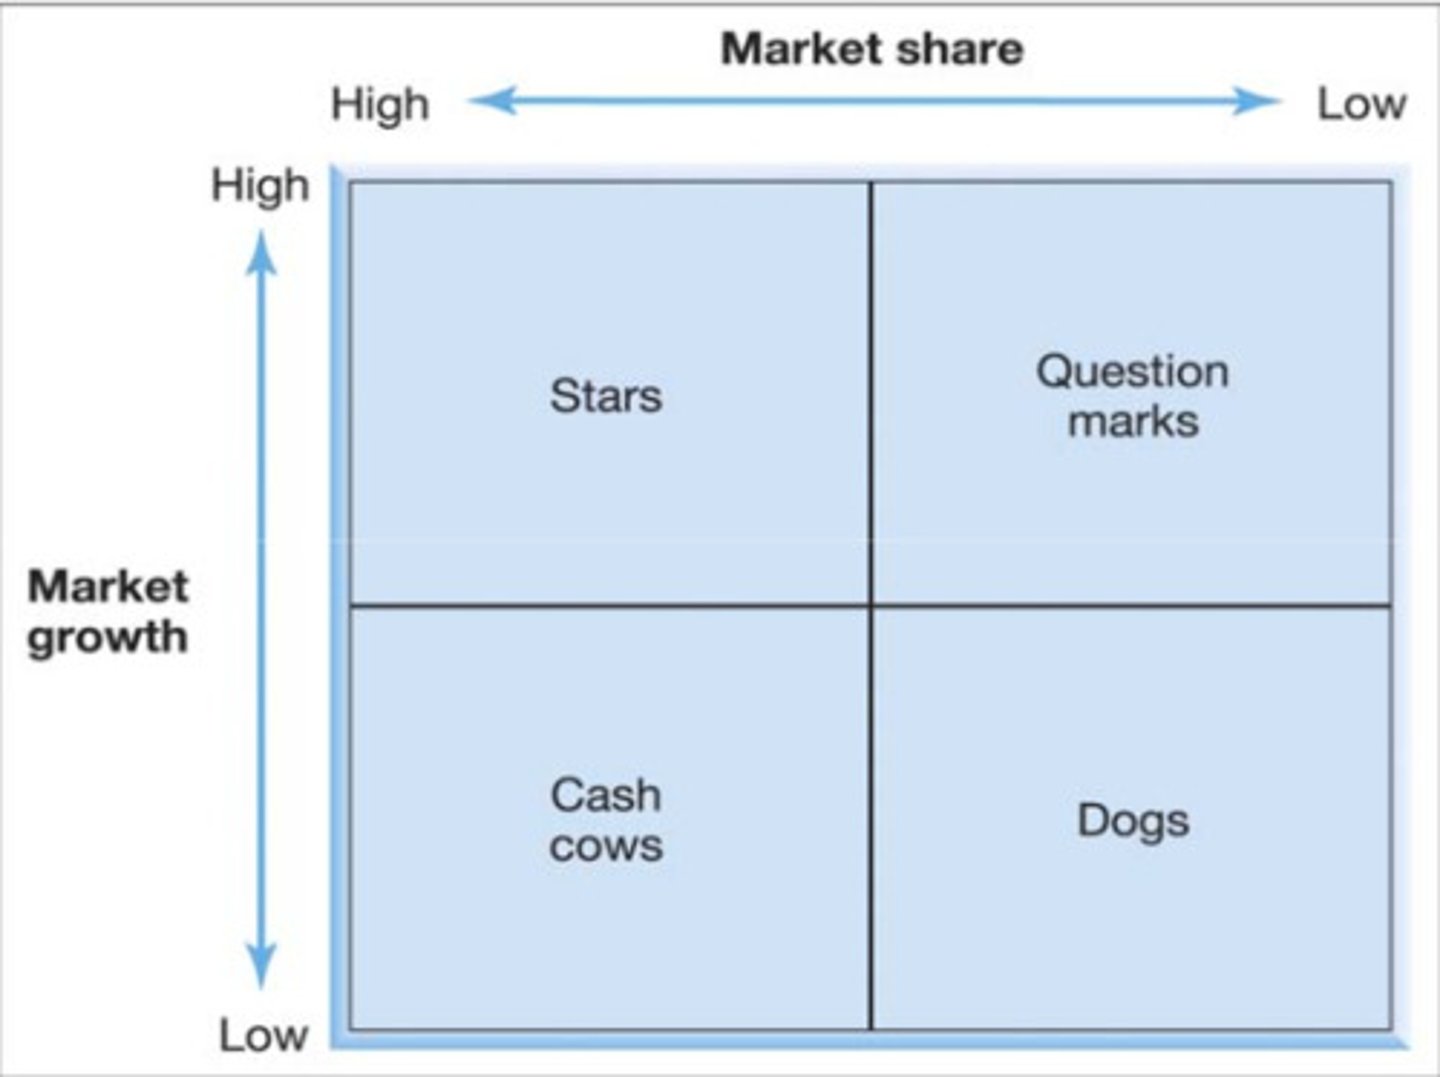 <p>Visual marketing management tool used to analyse a firm’s product portfolio </p><ul><li><p><strong>Stars</strong>: High market growth and high market share</p></li><li><p><strong>Cash cows</strong>: Low market growth and high market share </p></li><li><p><strong>Question mark:</strong> High market growth and low market share </p></li><li><p><strong>Dogs</strong>: Low market share and low market growth</p></li></ul>